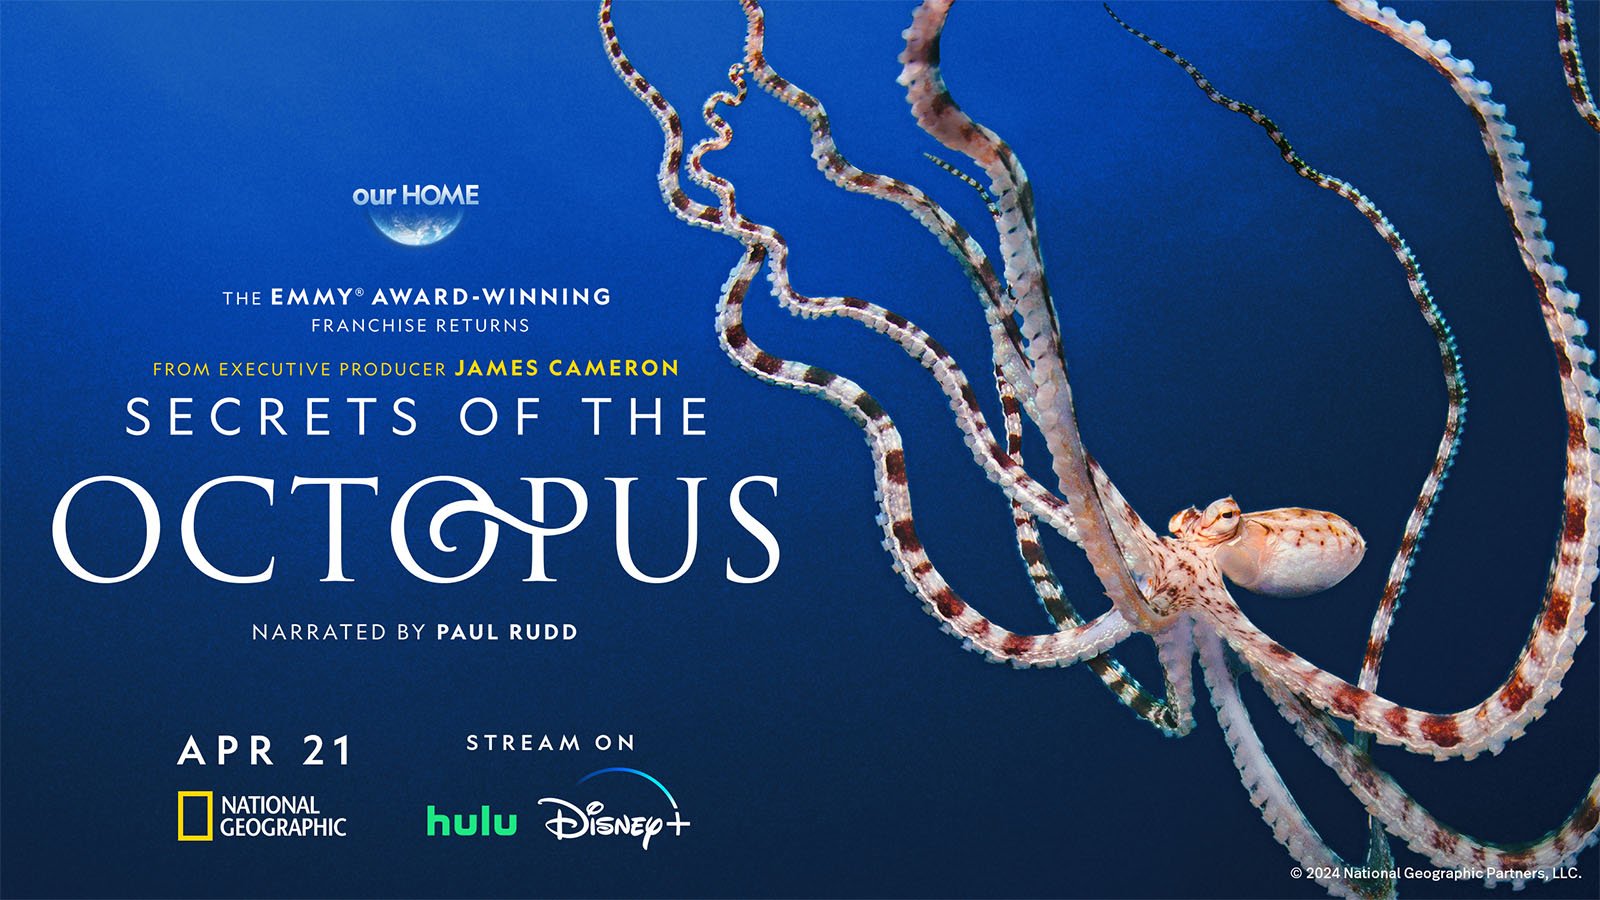 Promotional poster for the documentary "secrets of the octopus" by james cameron, featuring an octopus in deep blue water. text includes release details and streaming on hulu and disney+.